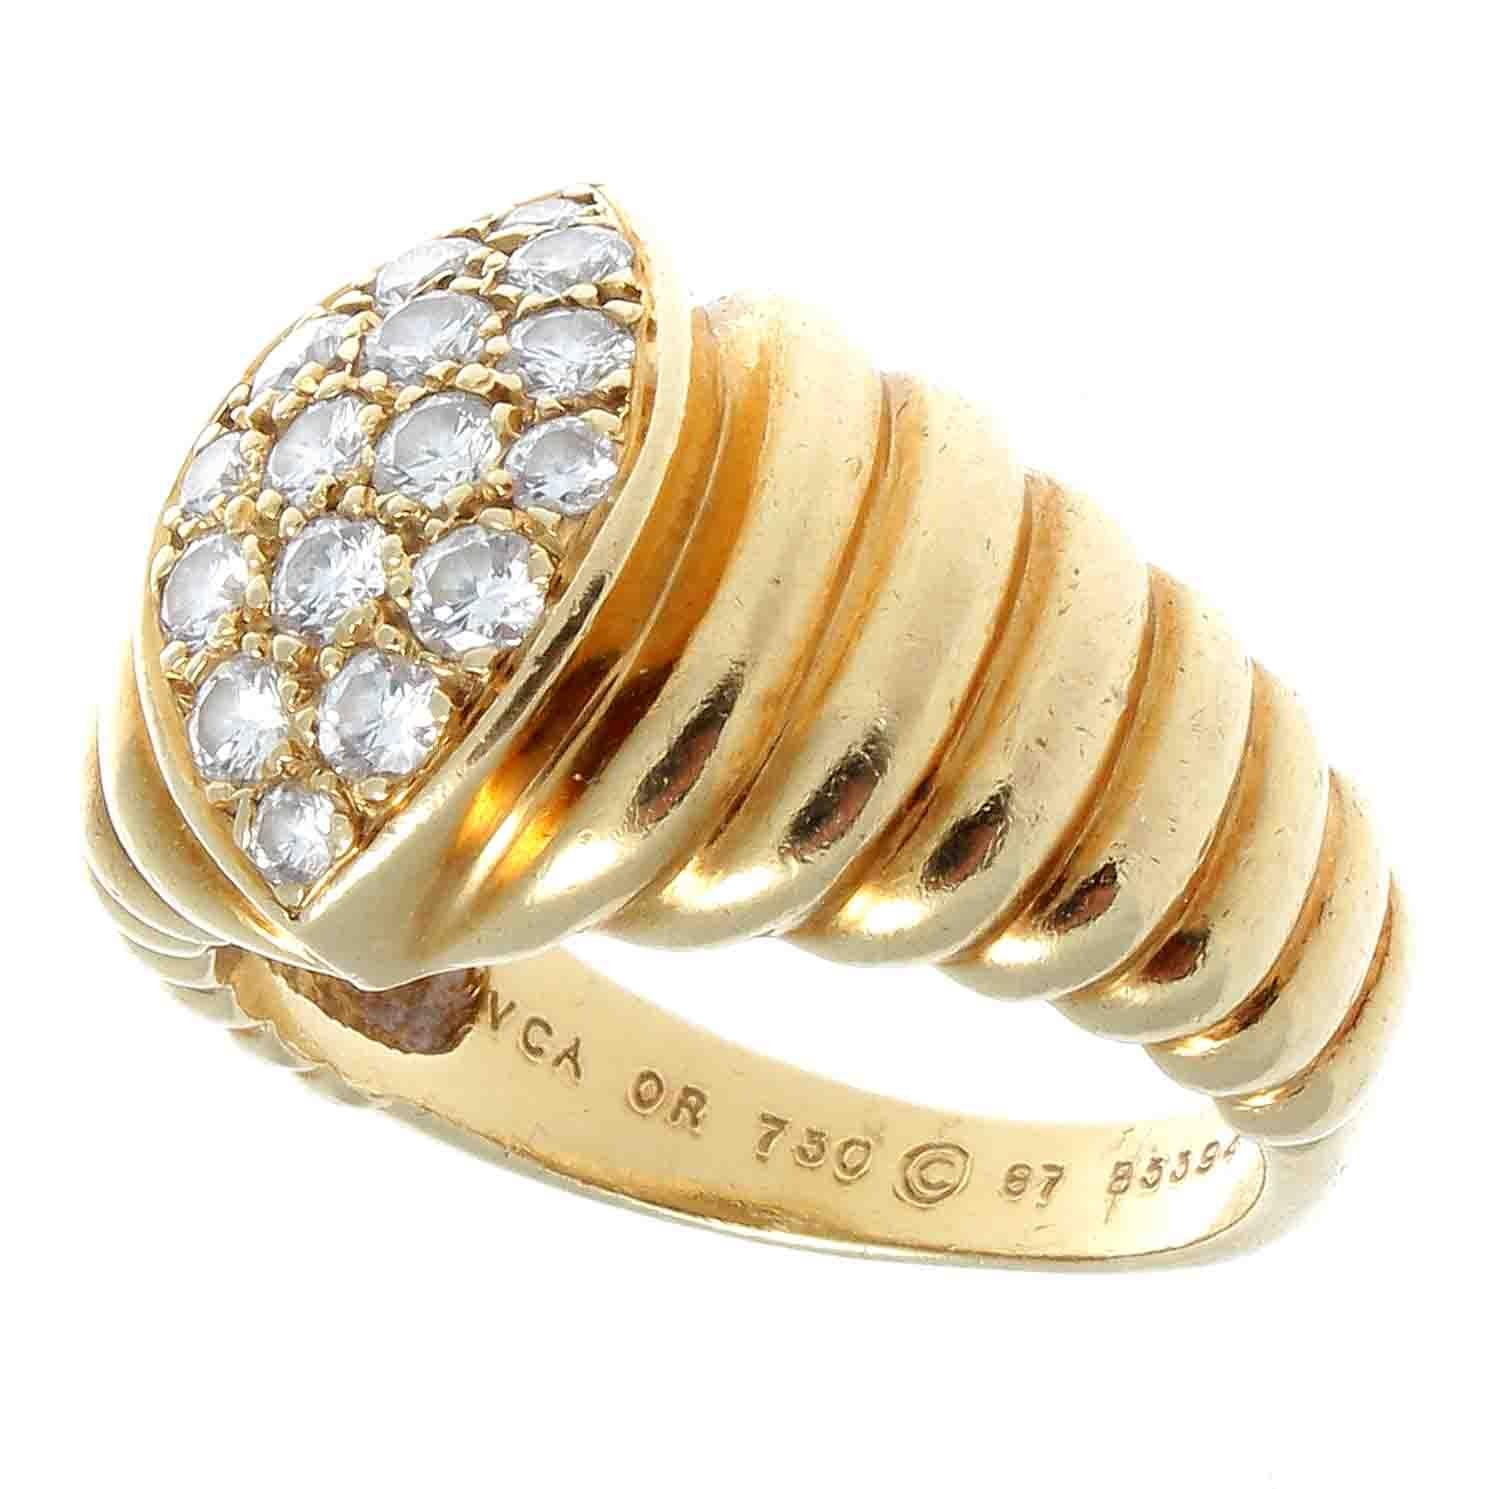 A symmetrical and eye pleasing design classically made fashionable by the creators at VCA. Featuring 16 white clean well matched diamonds set in hand crafted 18 yellow gold. Signed VCA, numbered and stamped with French hallmarks.

Ring size 6 and